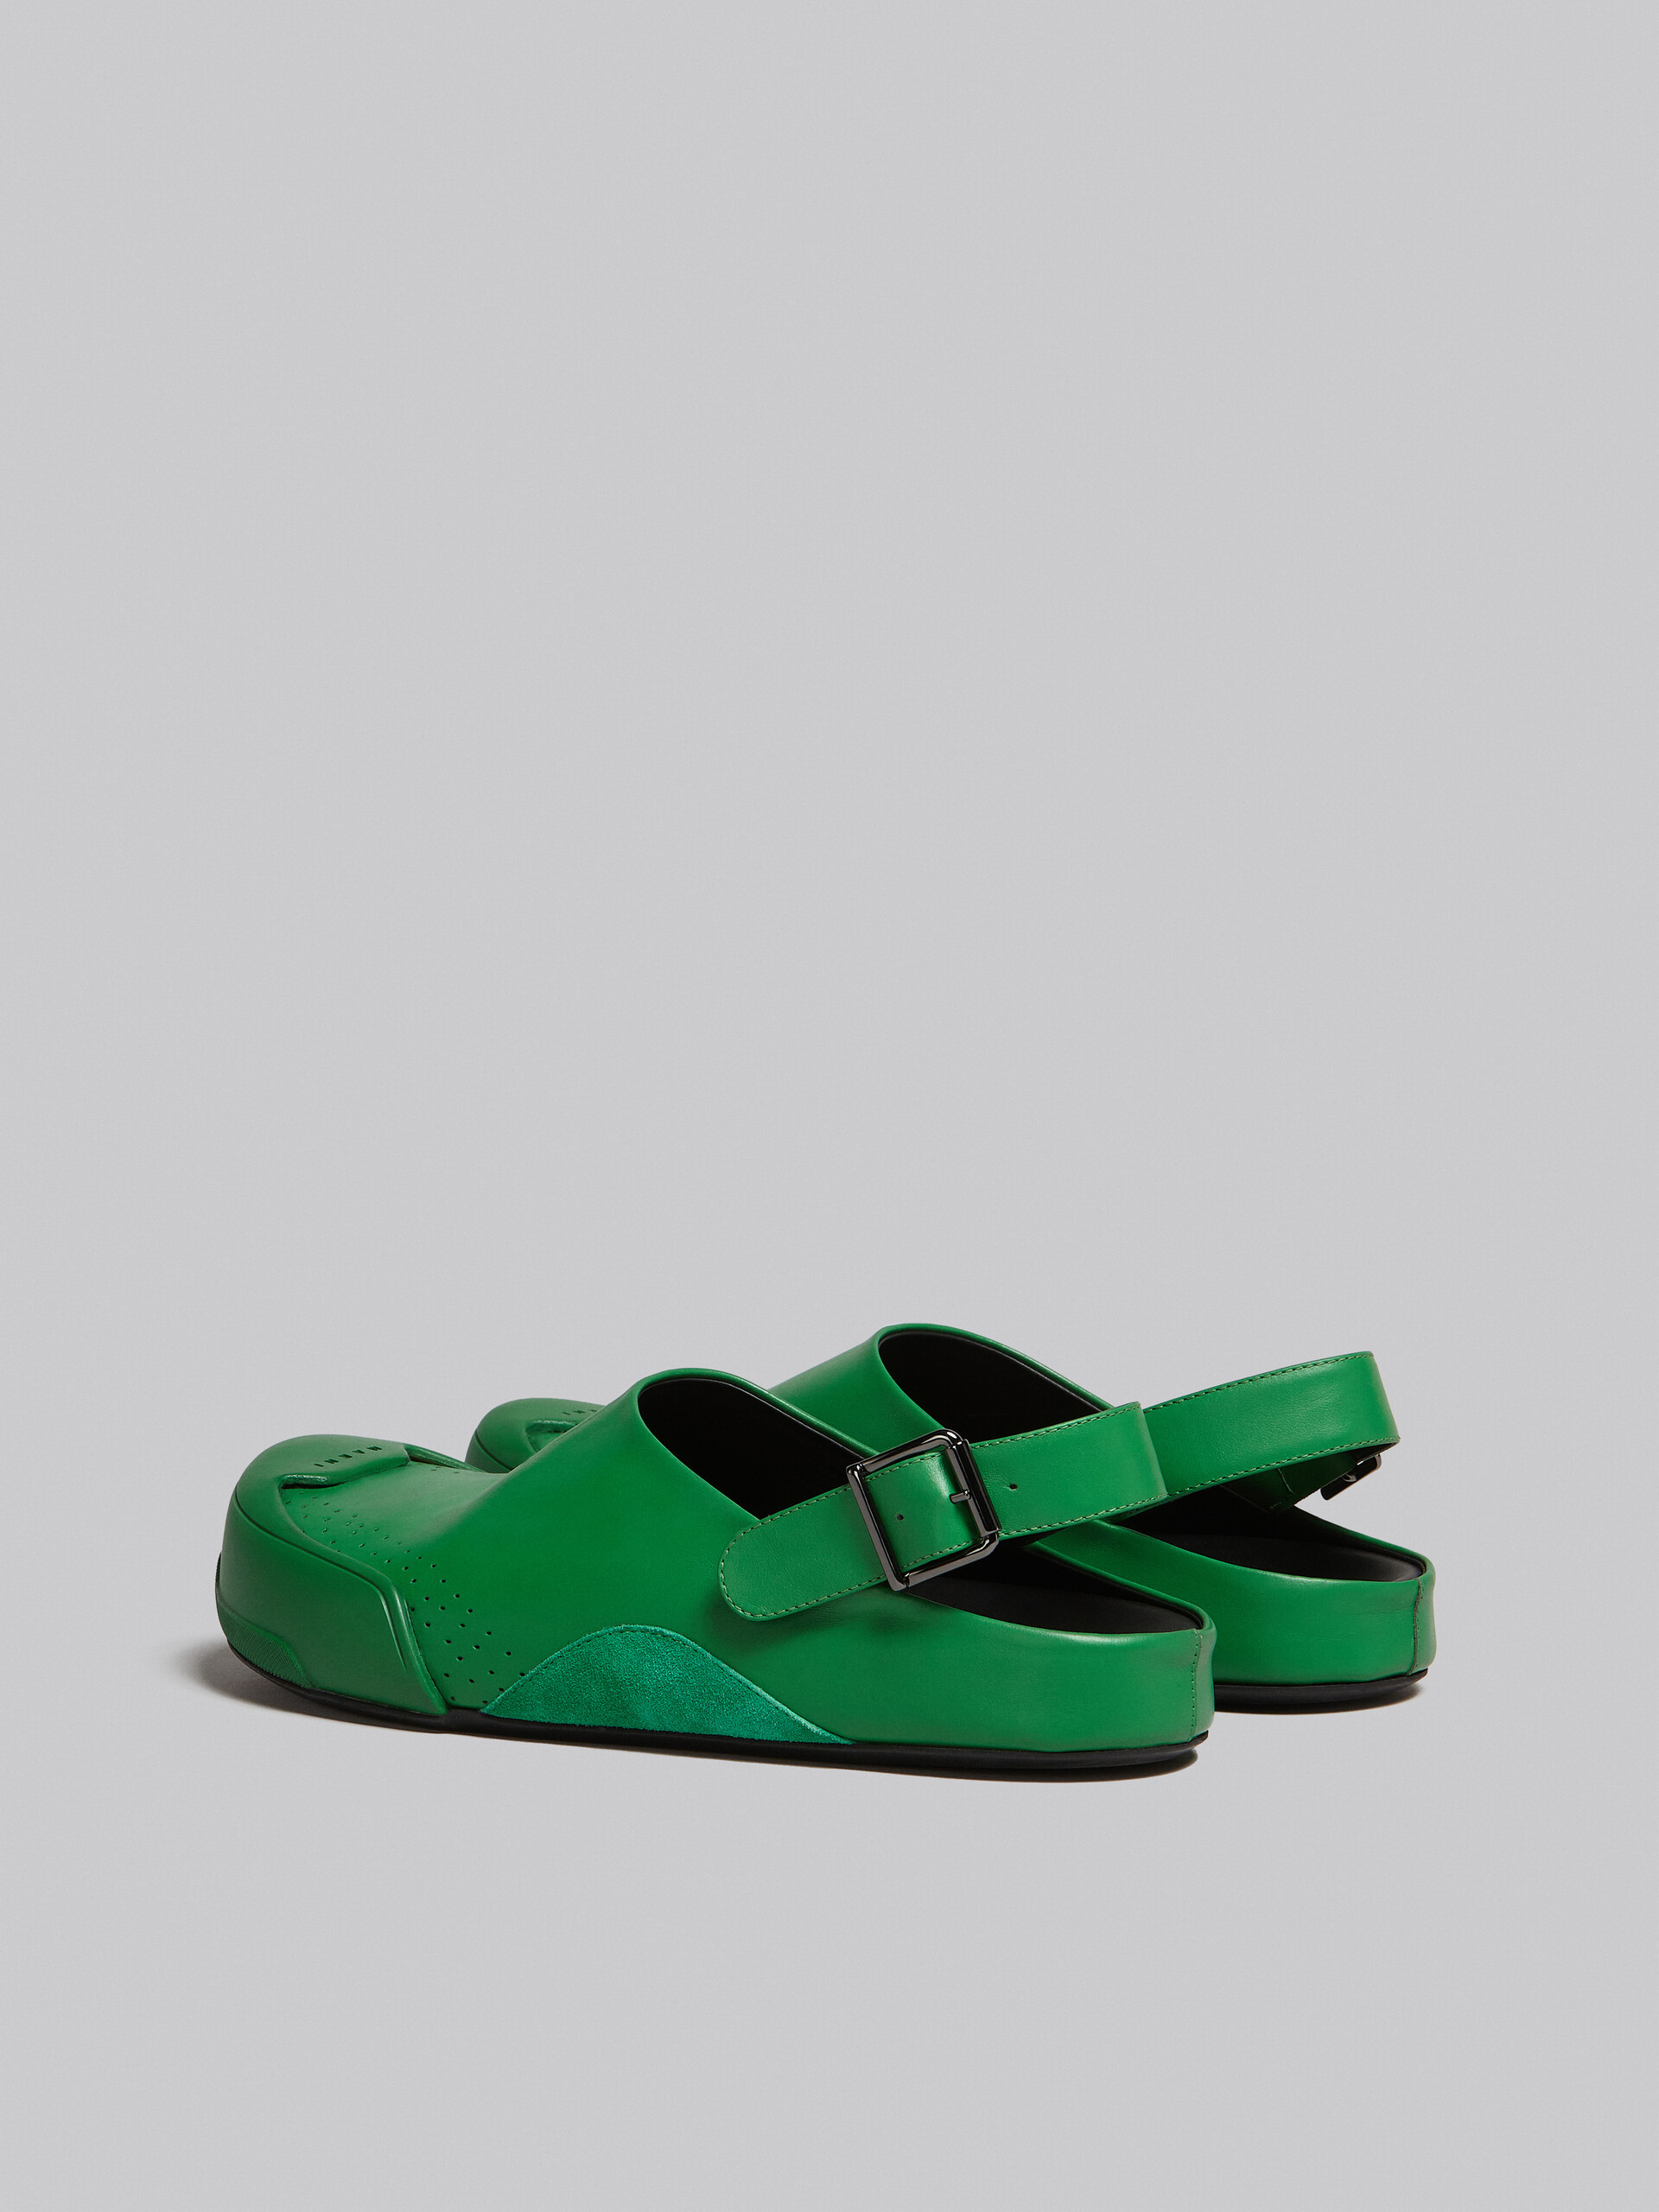 Green leather and suede Dada Sabot - Clogs - Image 3